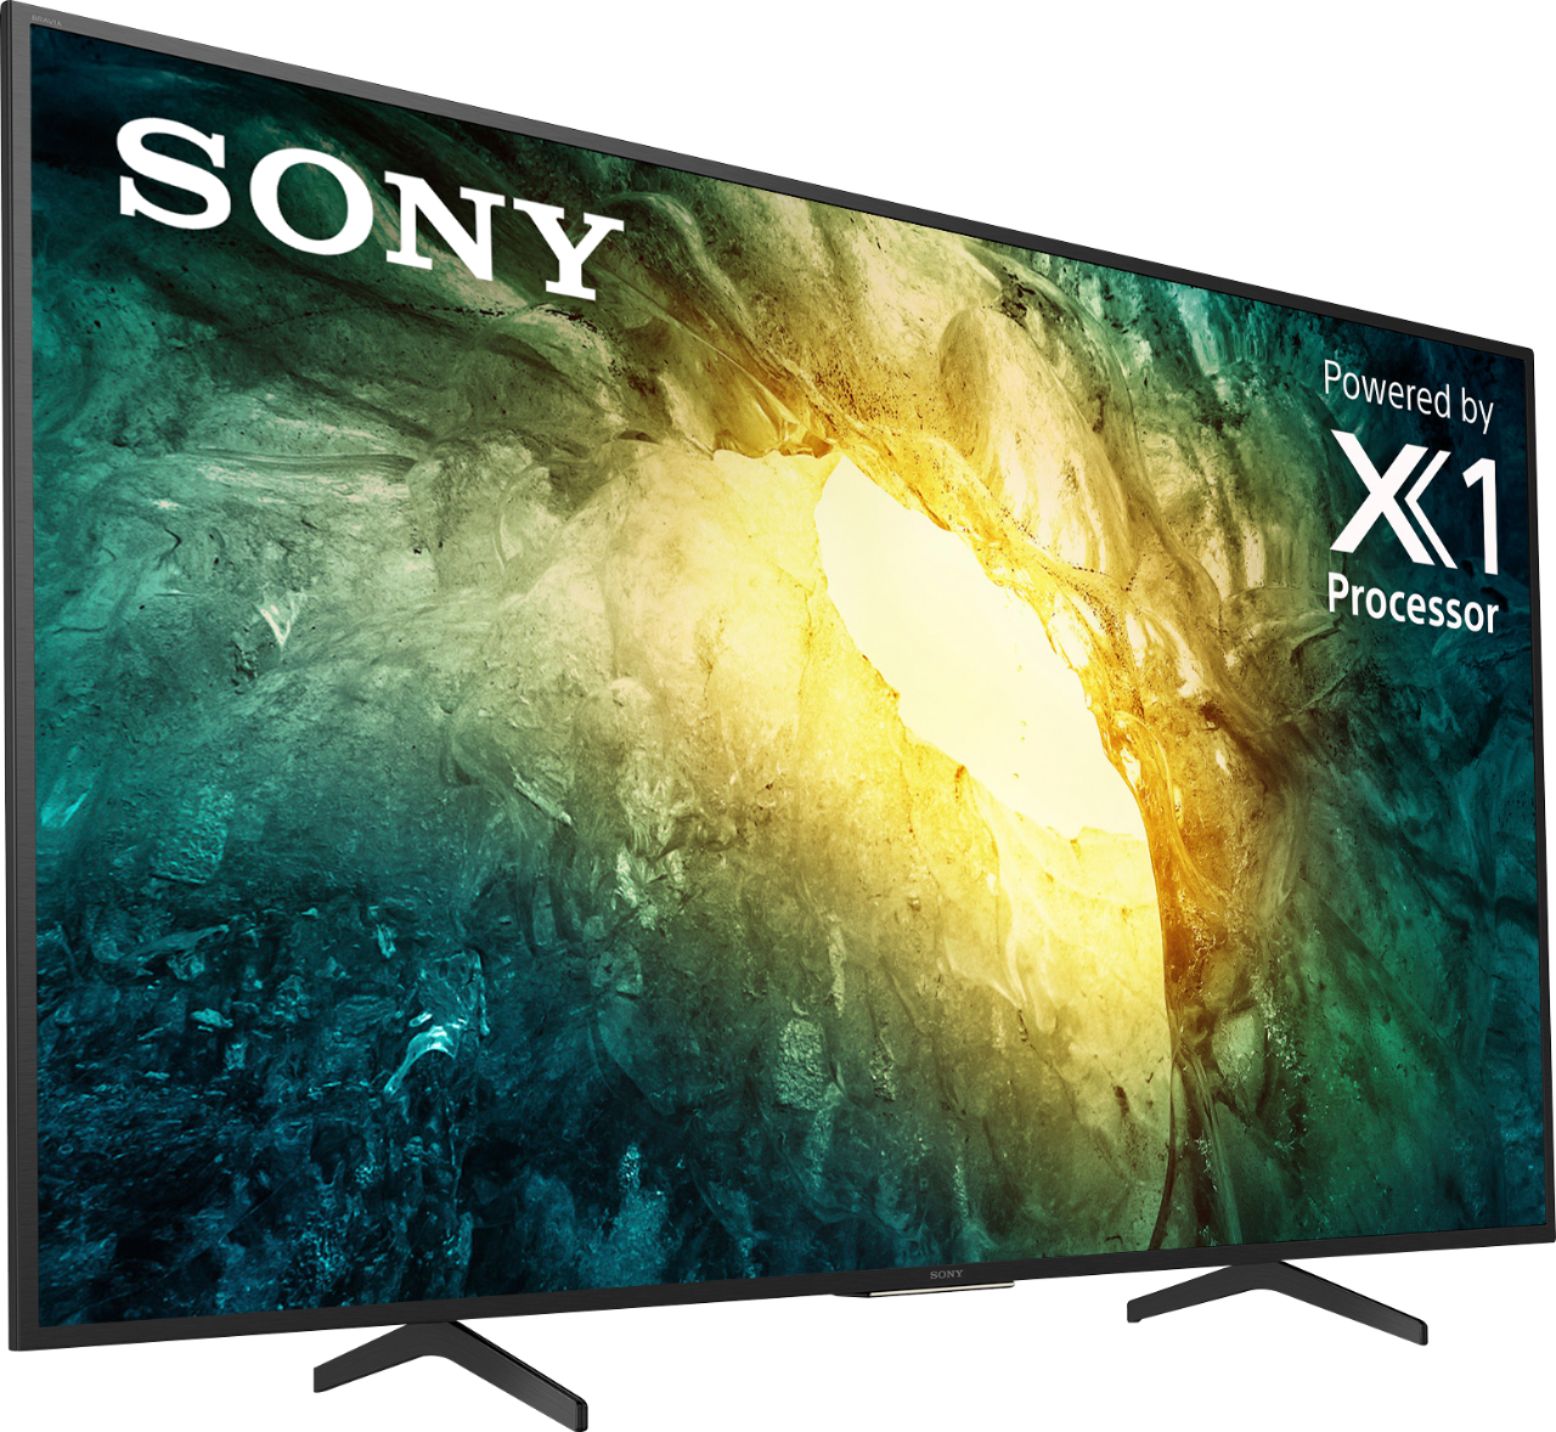 Angle View: Sony - 55" Class X750H Series LED 4K UHD Smart Android TV